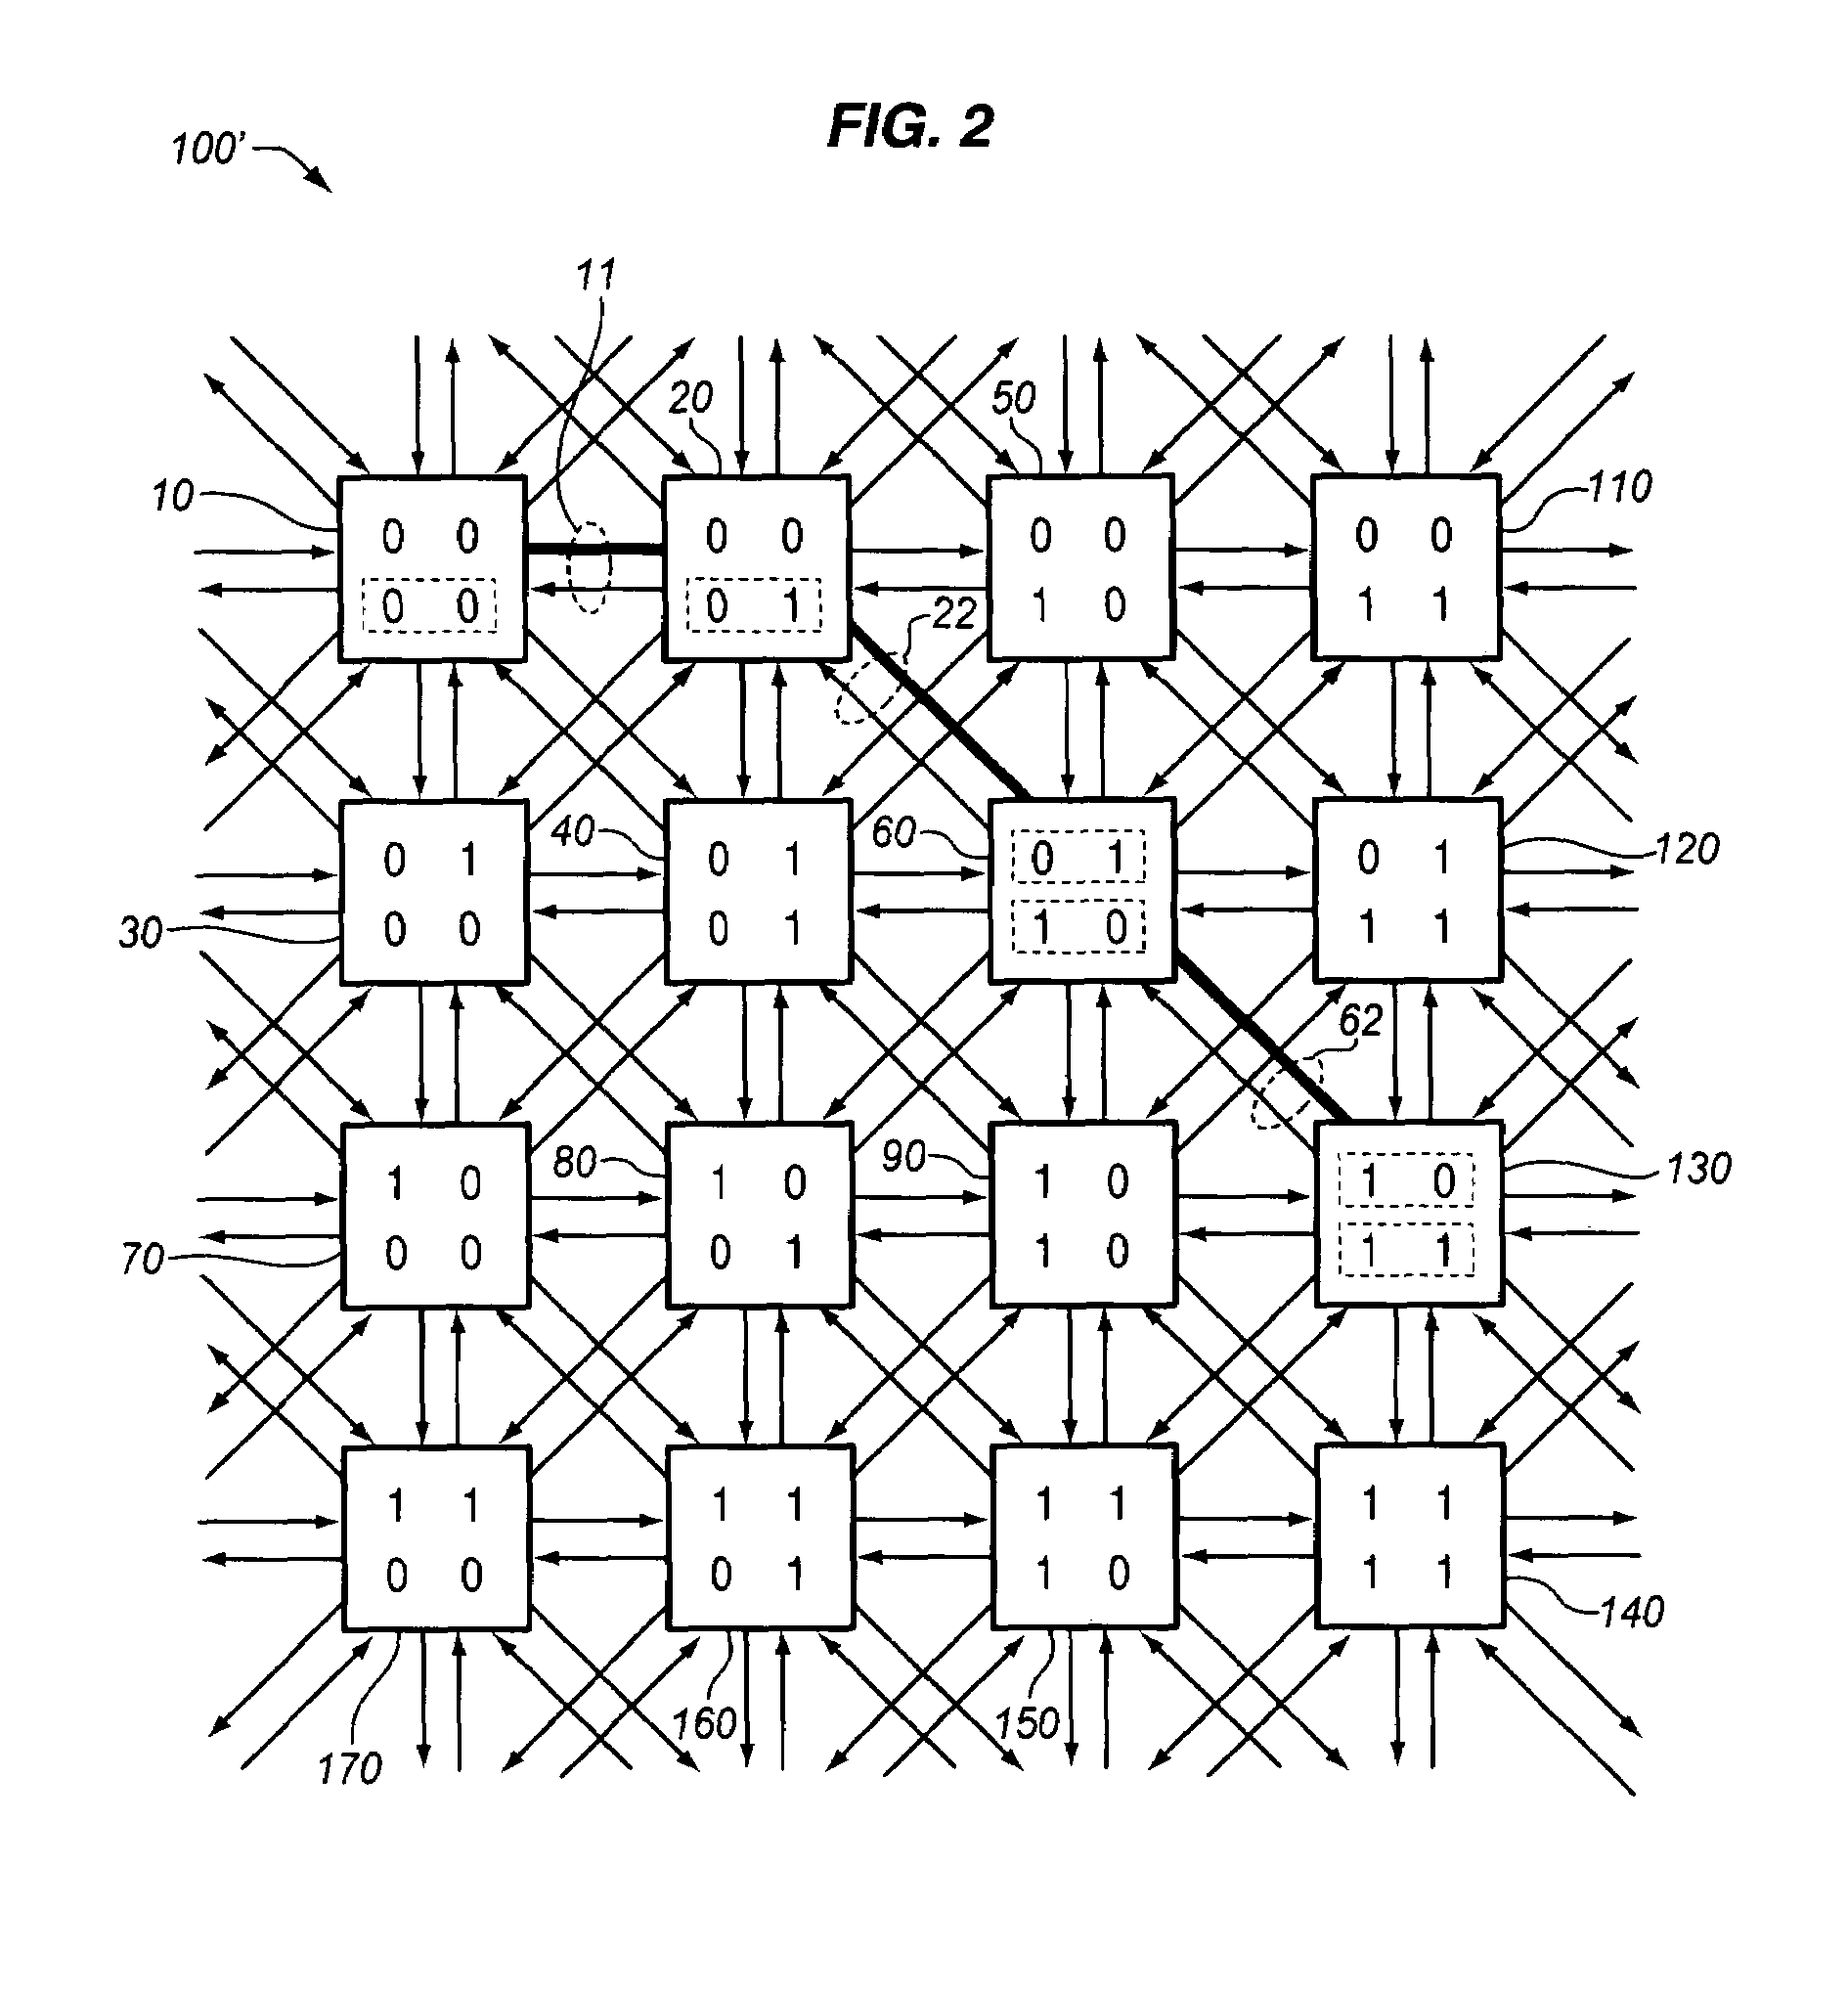 Packet-switching network with symmetrical topology and method of routing packets